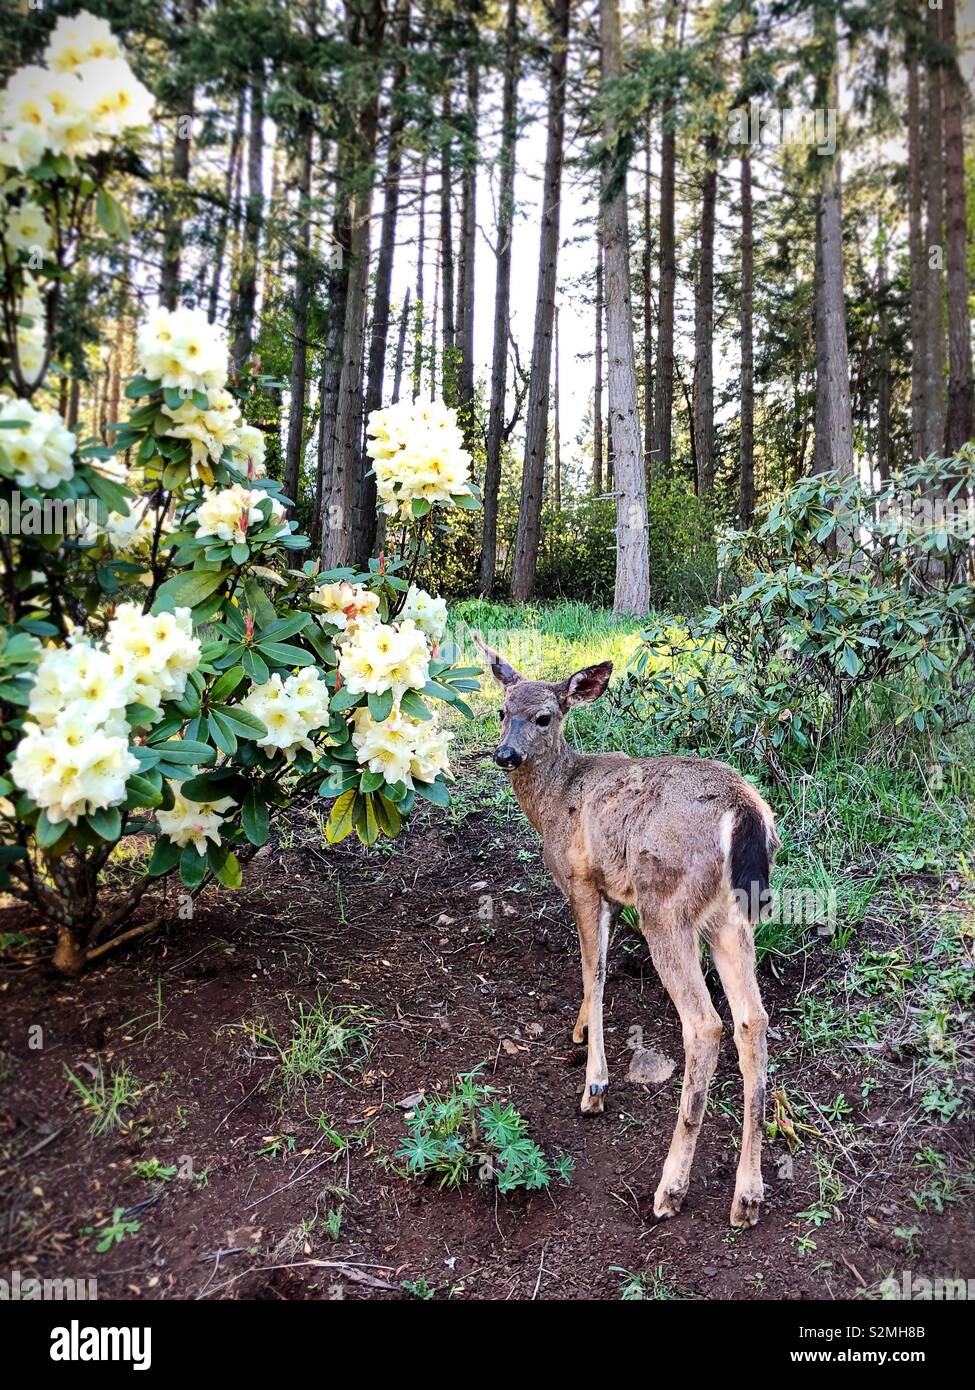 A young deer next to a rhododendron bush in Eugene, Oregon, USA. Stock Photo